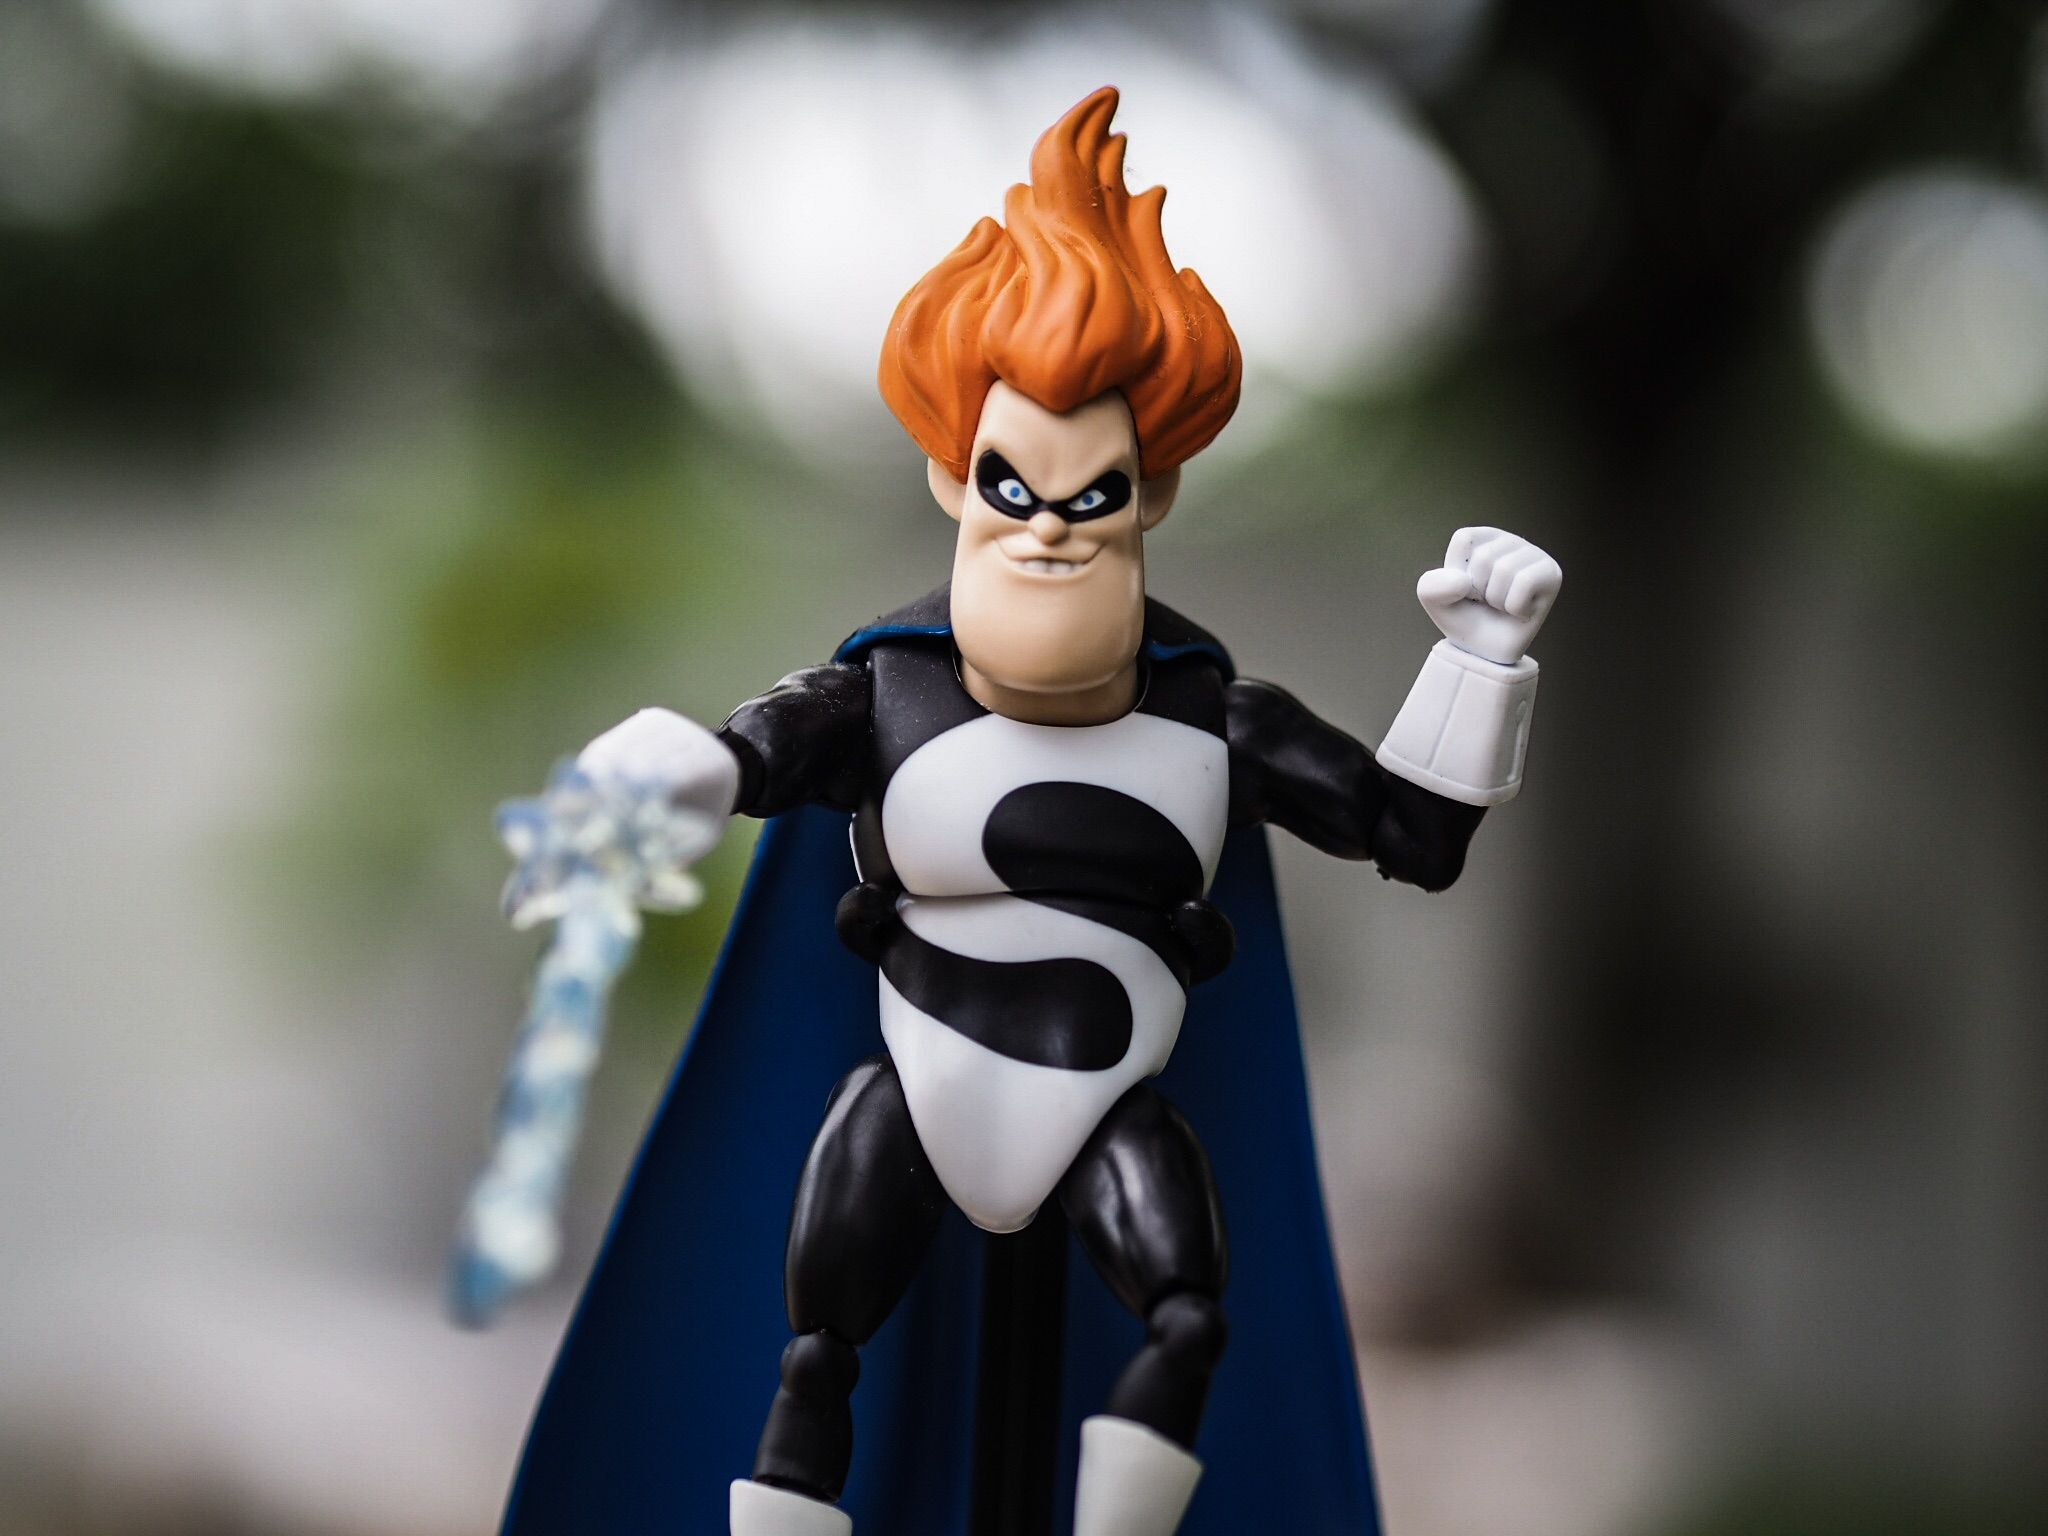 Syndrome from The Incredibles